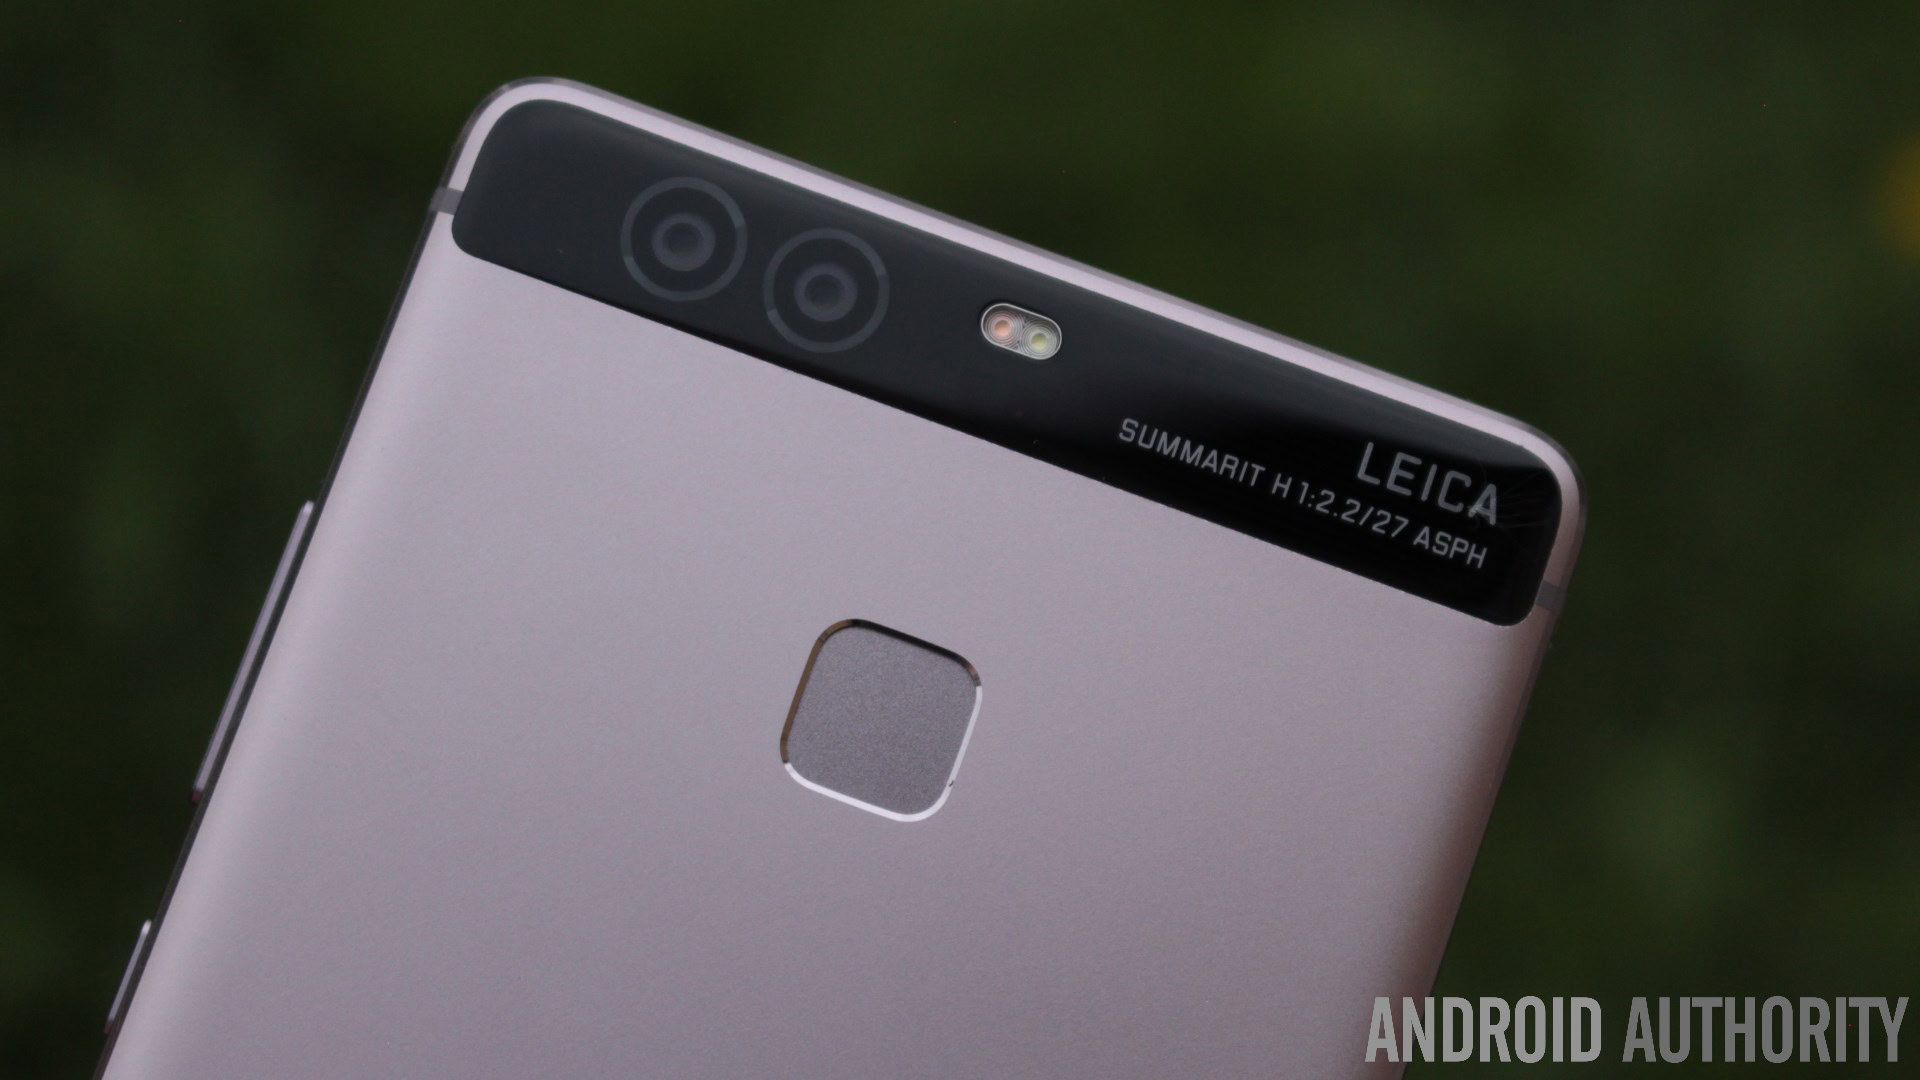 Aanval Cadeau wees onder de indruk HUAWEI P9 review - Android Authority